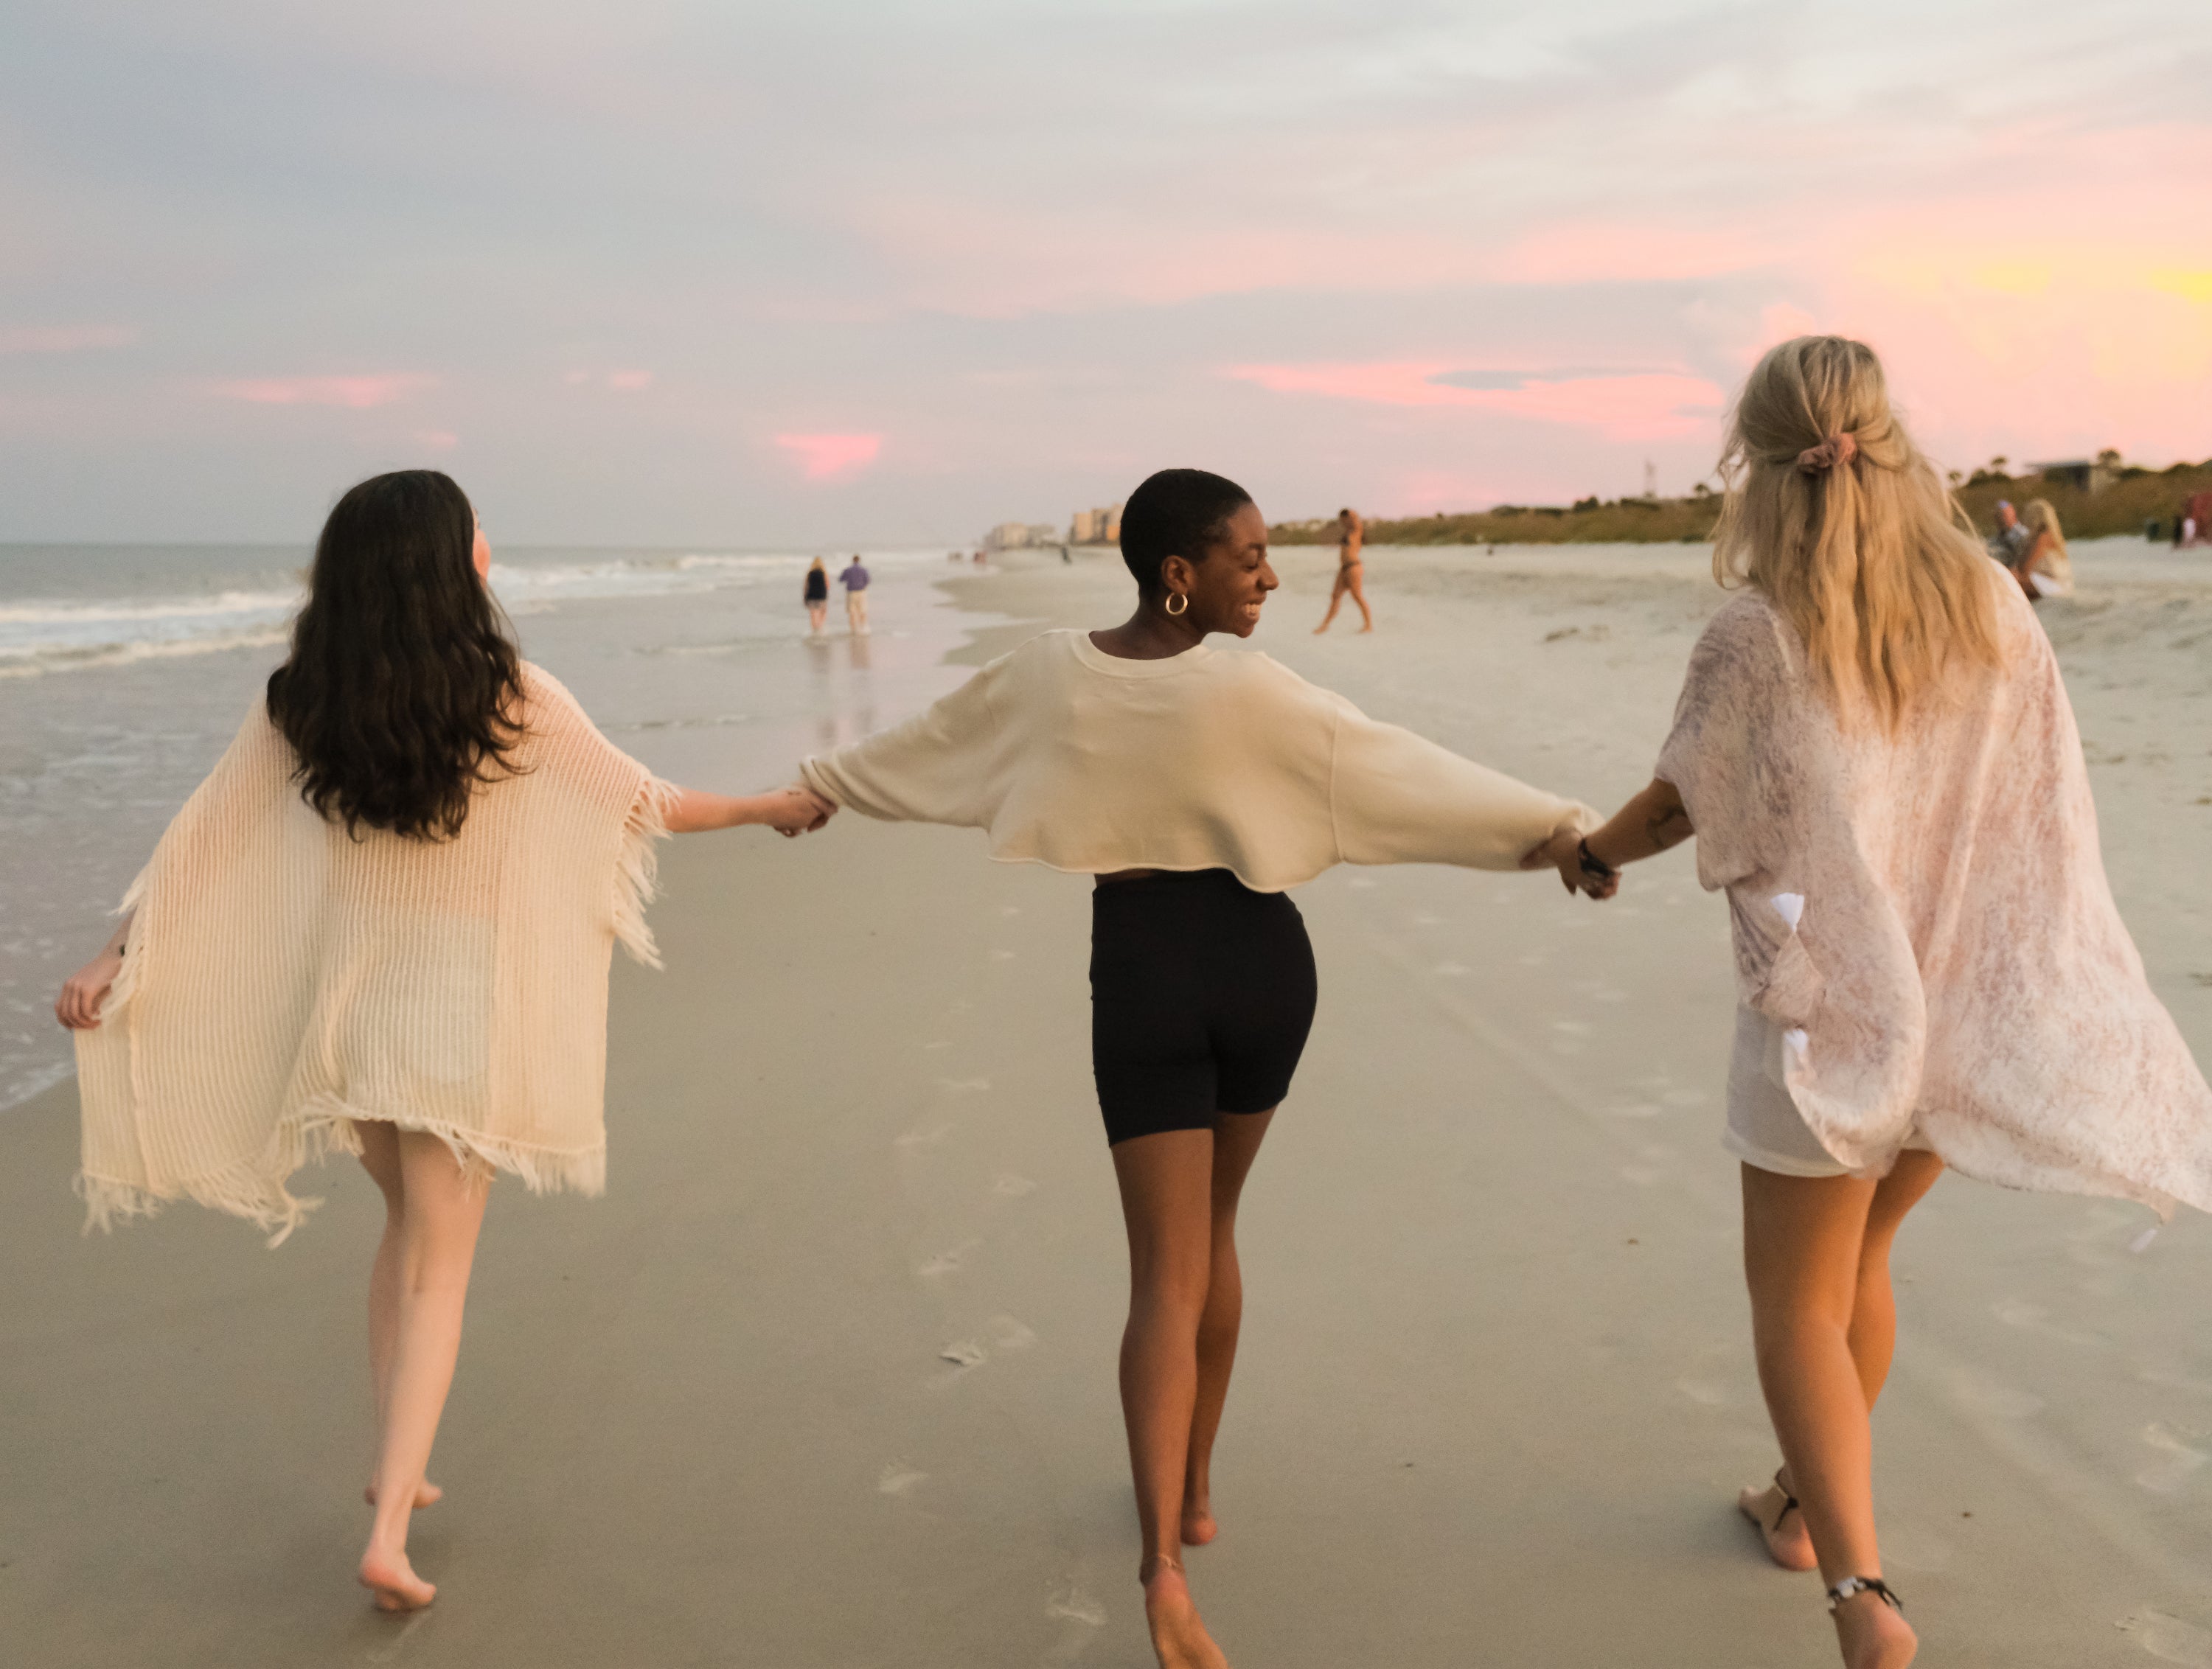 East Coast Beach in the USA at Sunset with three best friends holding hands and skipping down the beach. Pink hues, relaxing vibe. 